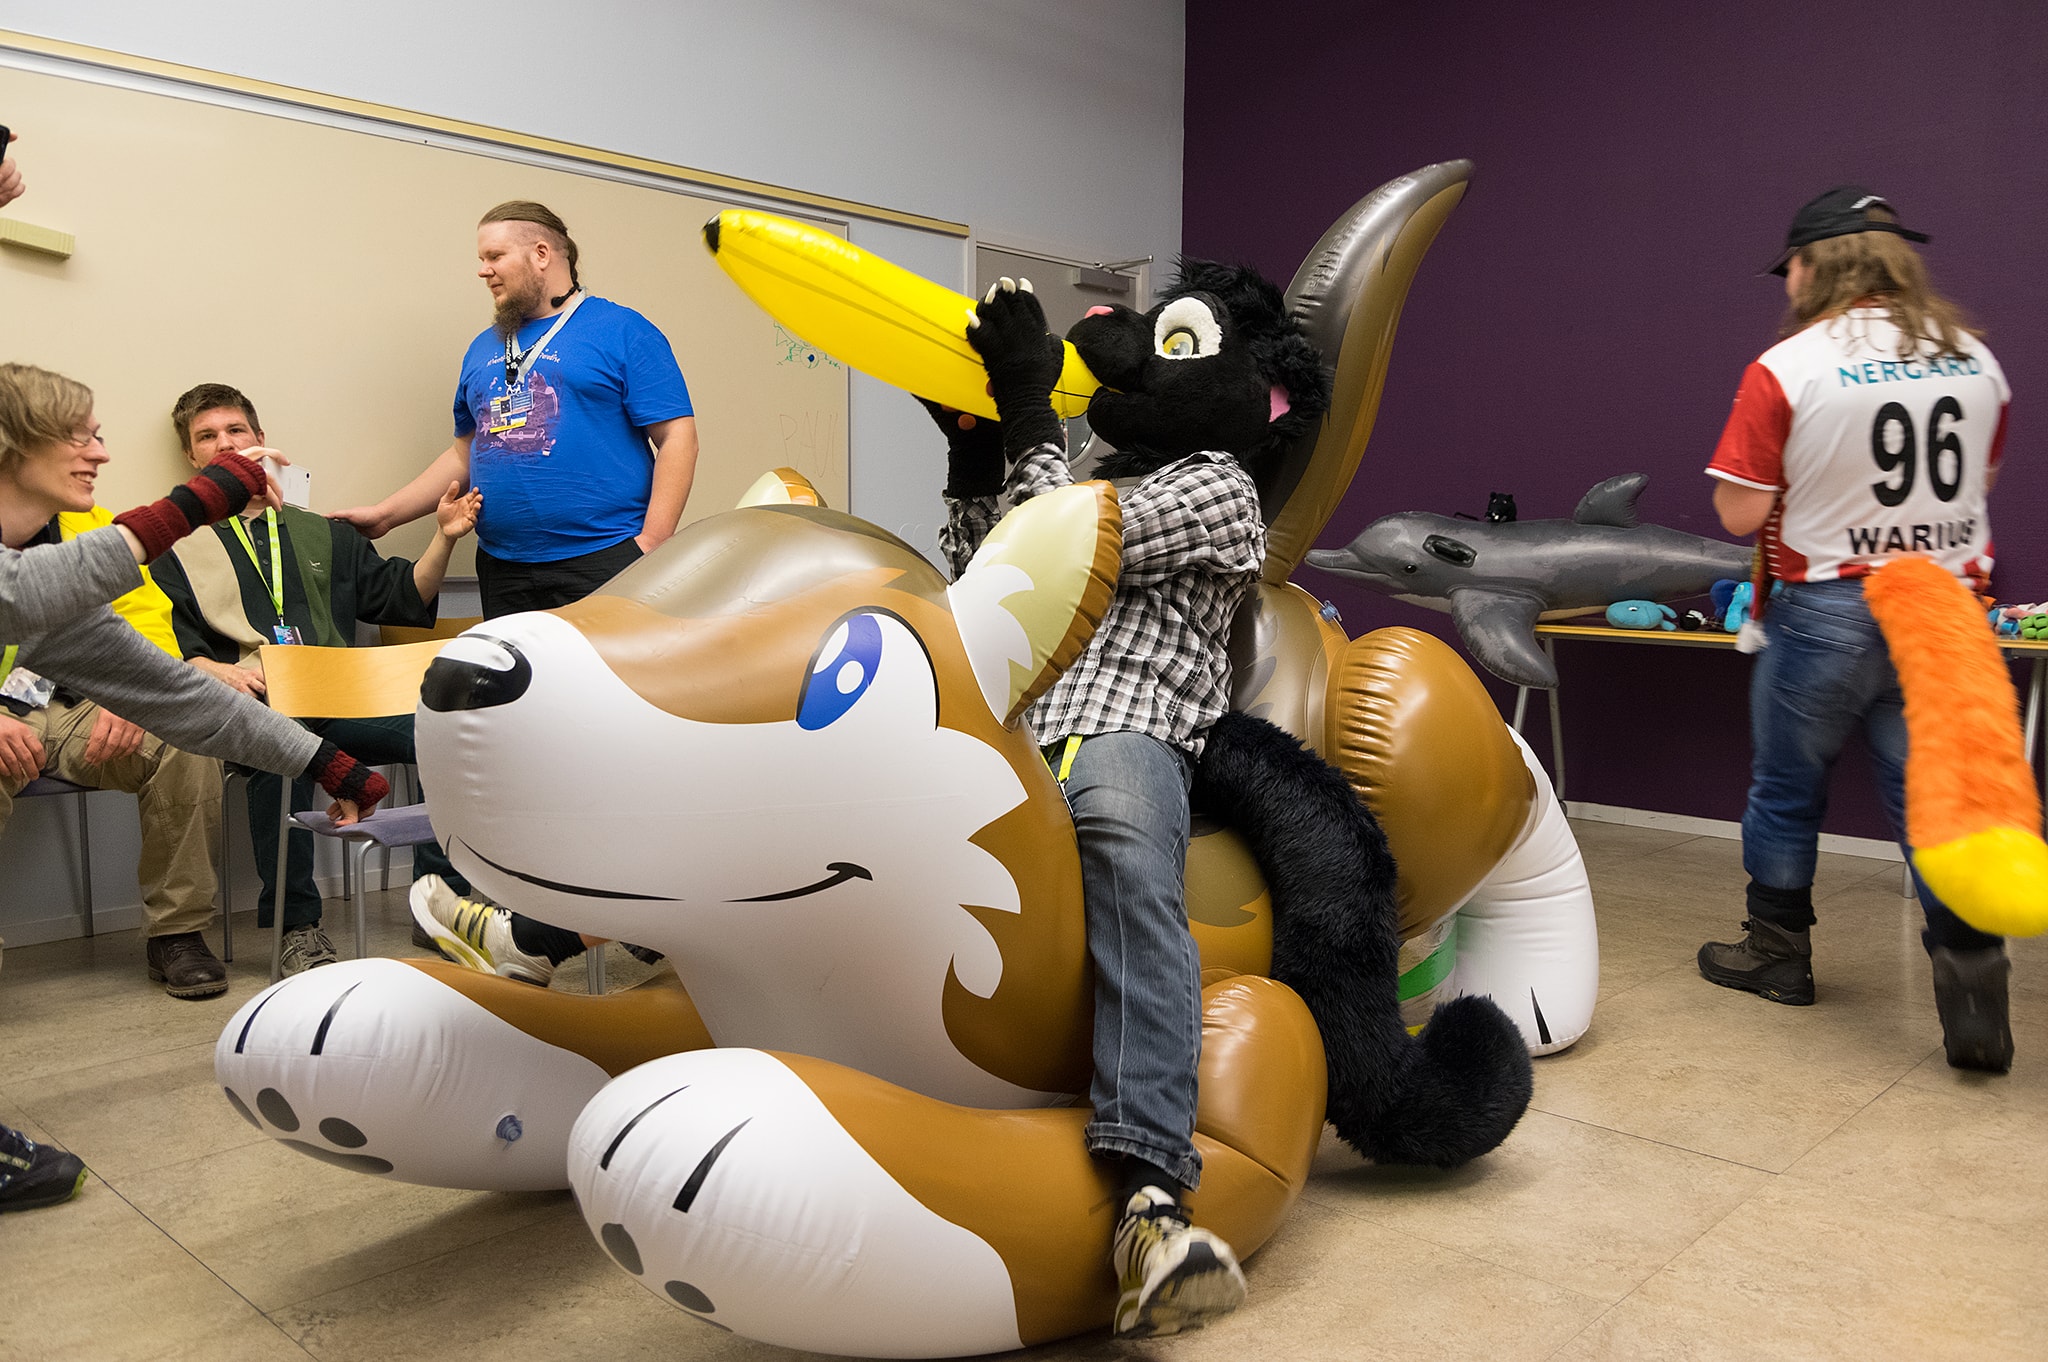 Show off your inflatable animals and socialize with others.